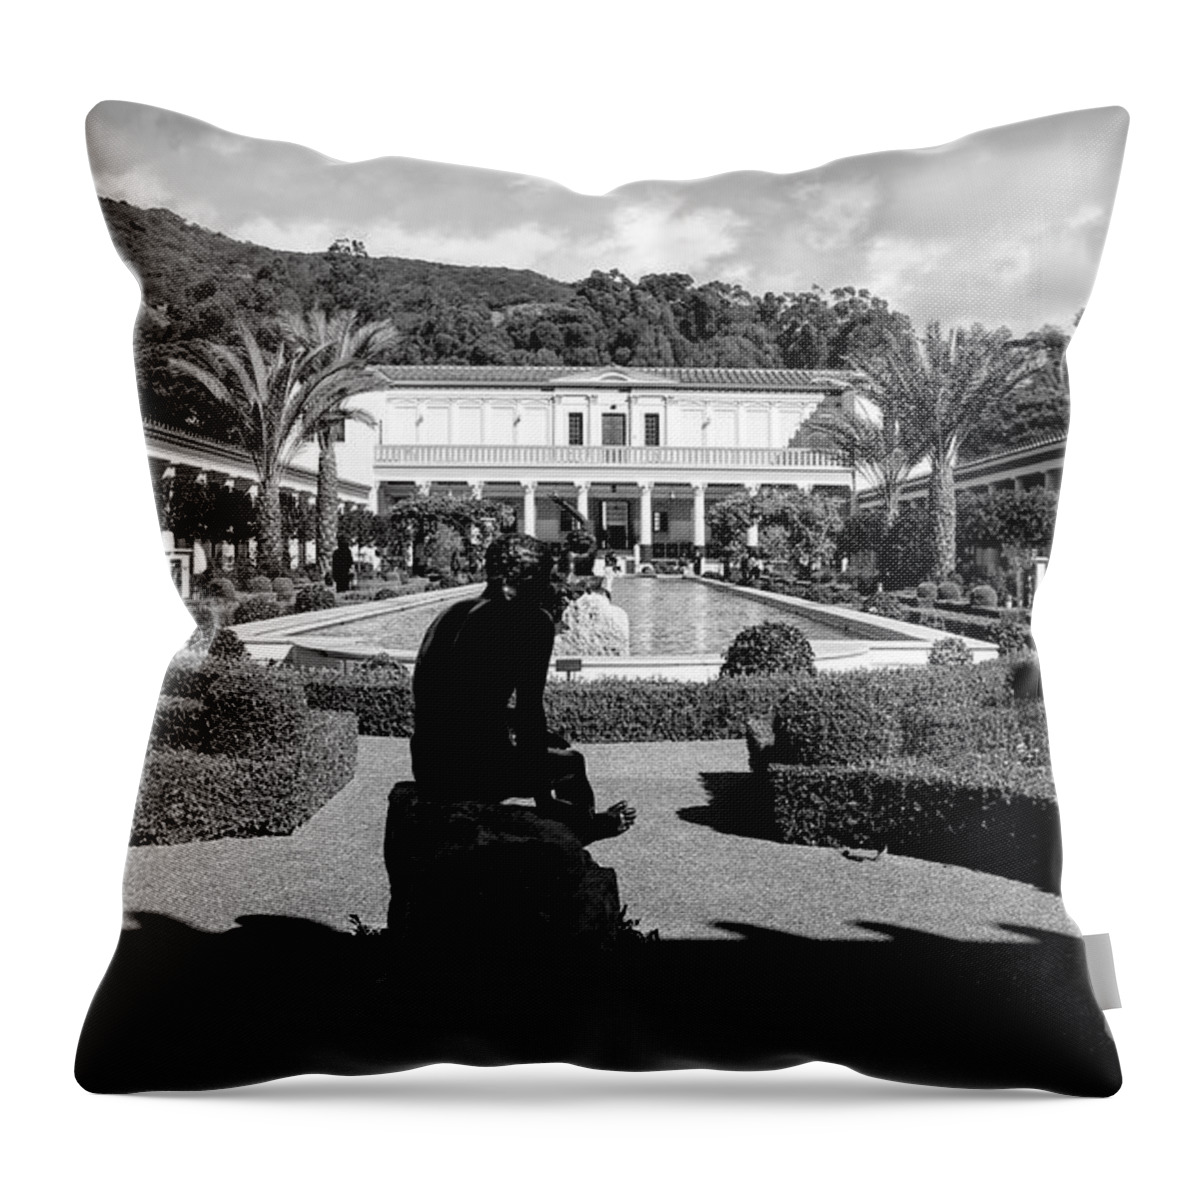 Getty Throw Pillow featuring the photograph Wide Angle Getty Villa Black White by Chuck Kuhn